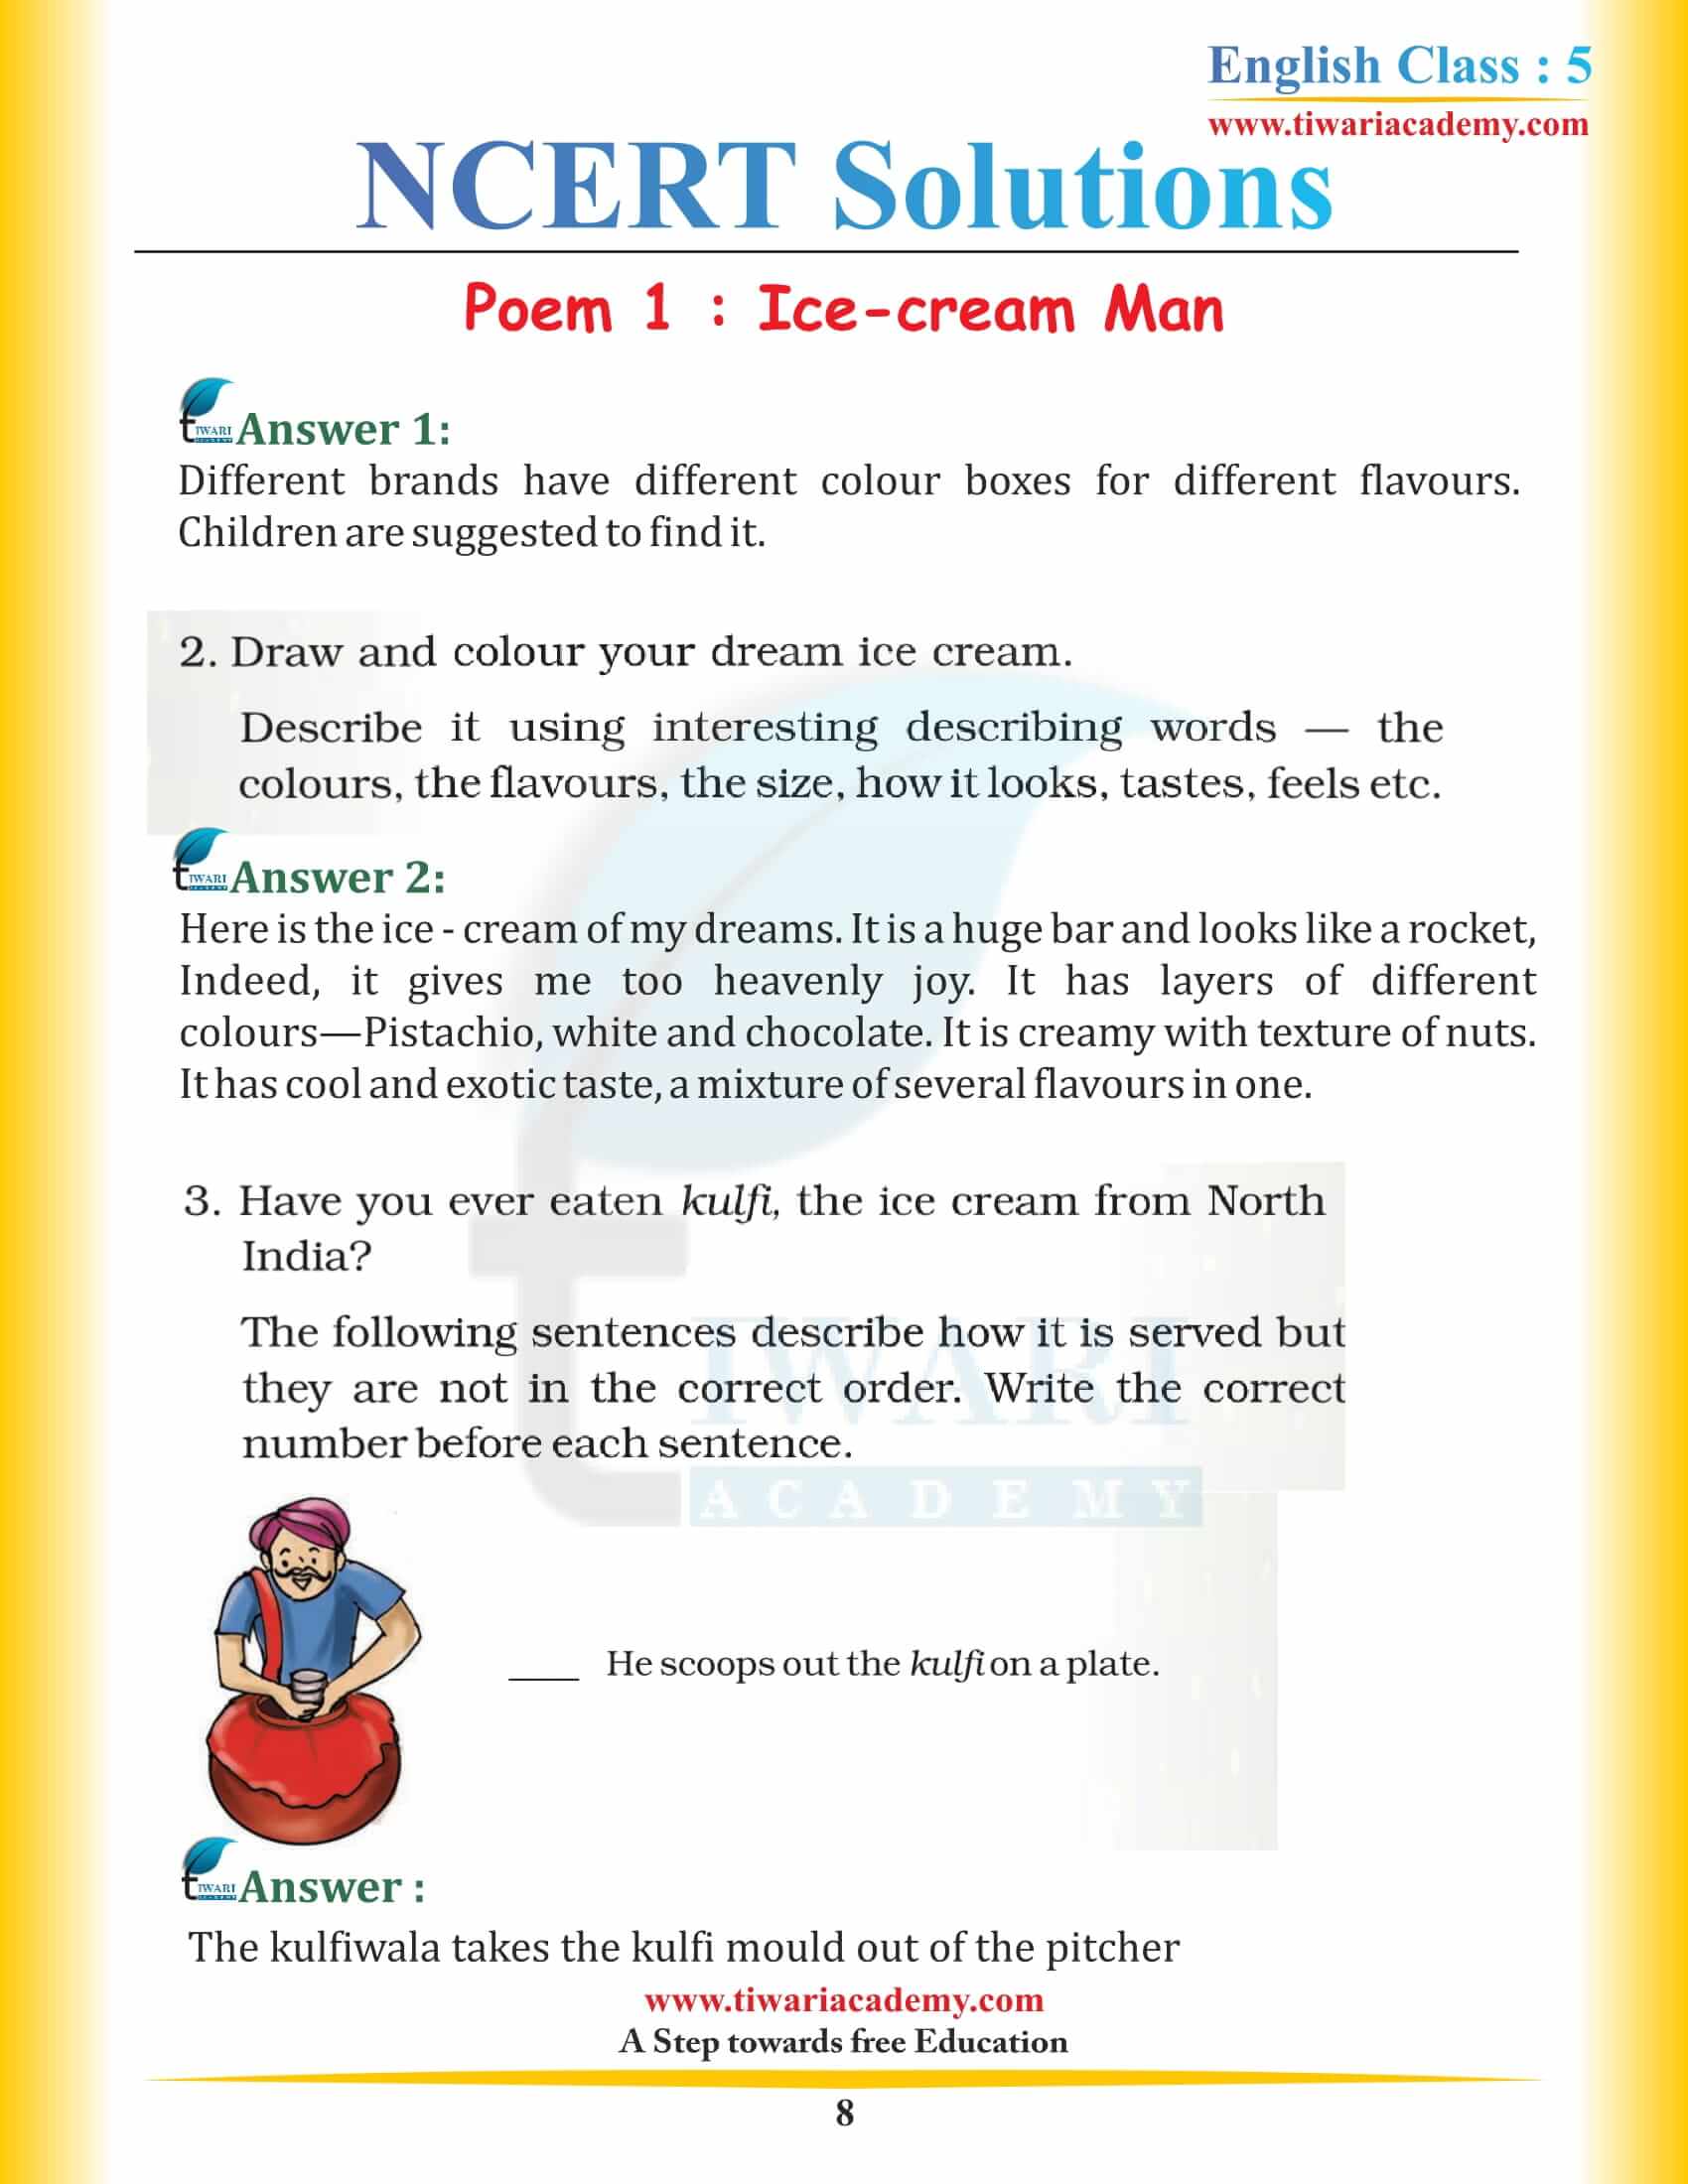 NCERT Solutions for Class 5 English Chapter 1 Ice-cream Man all Questions answers